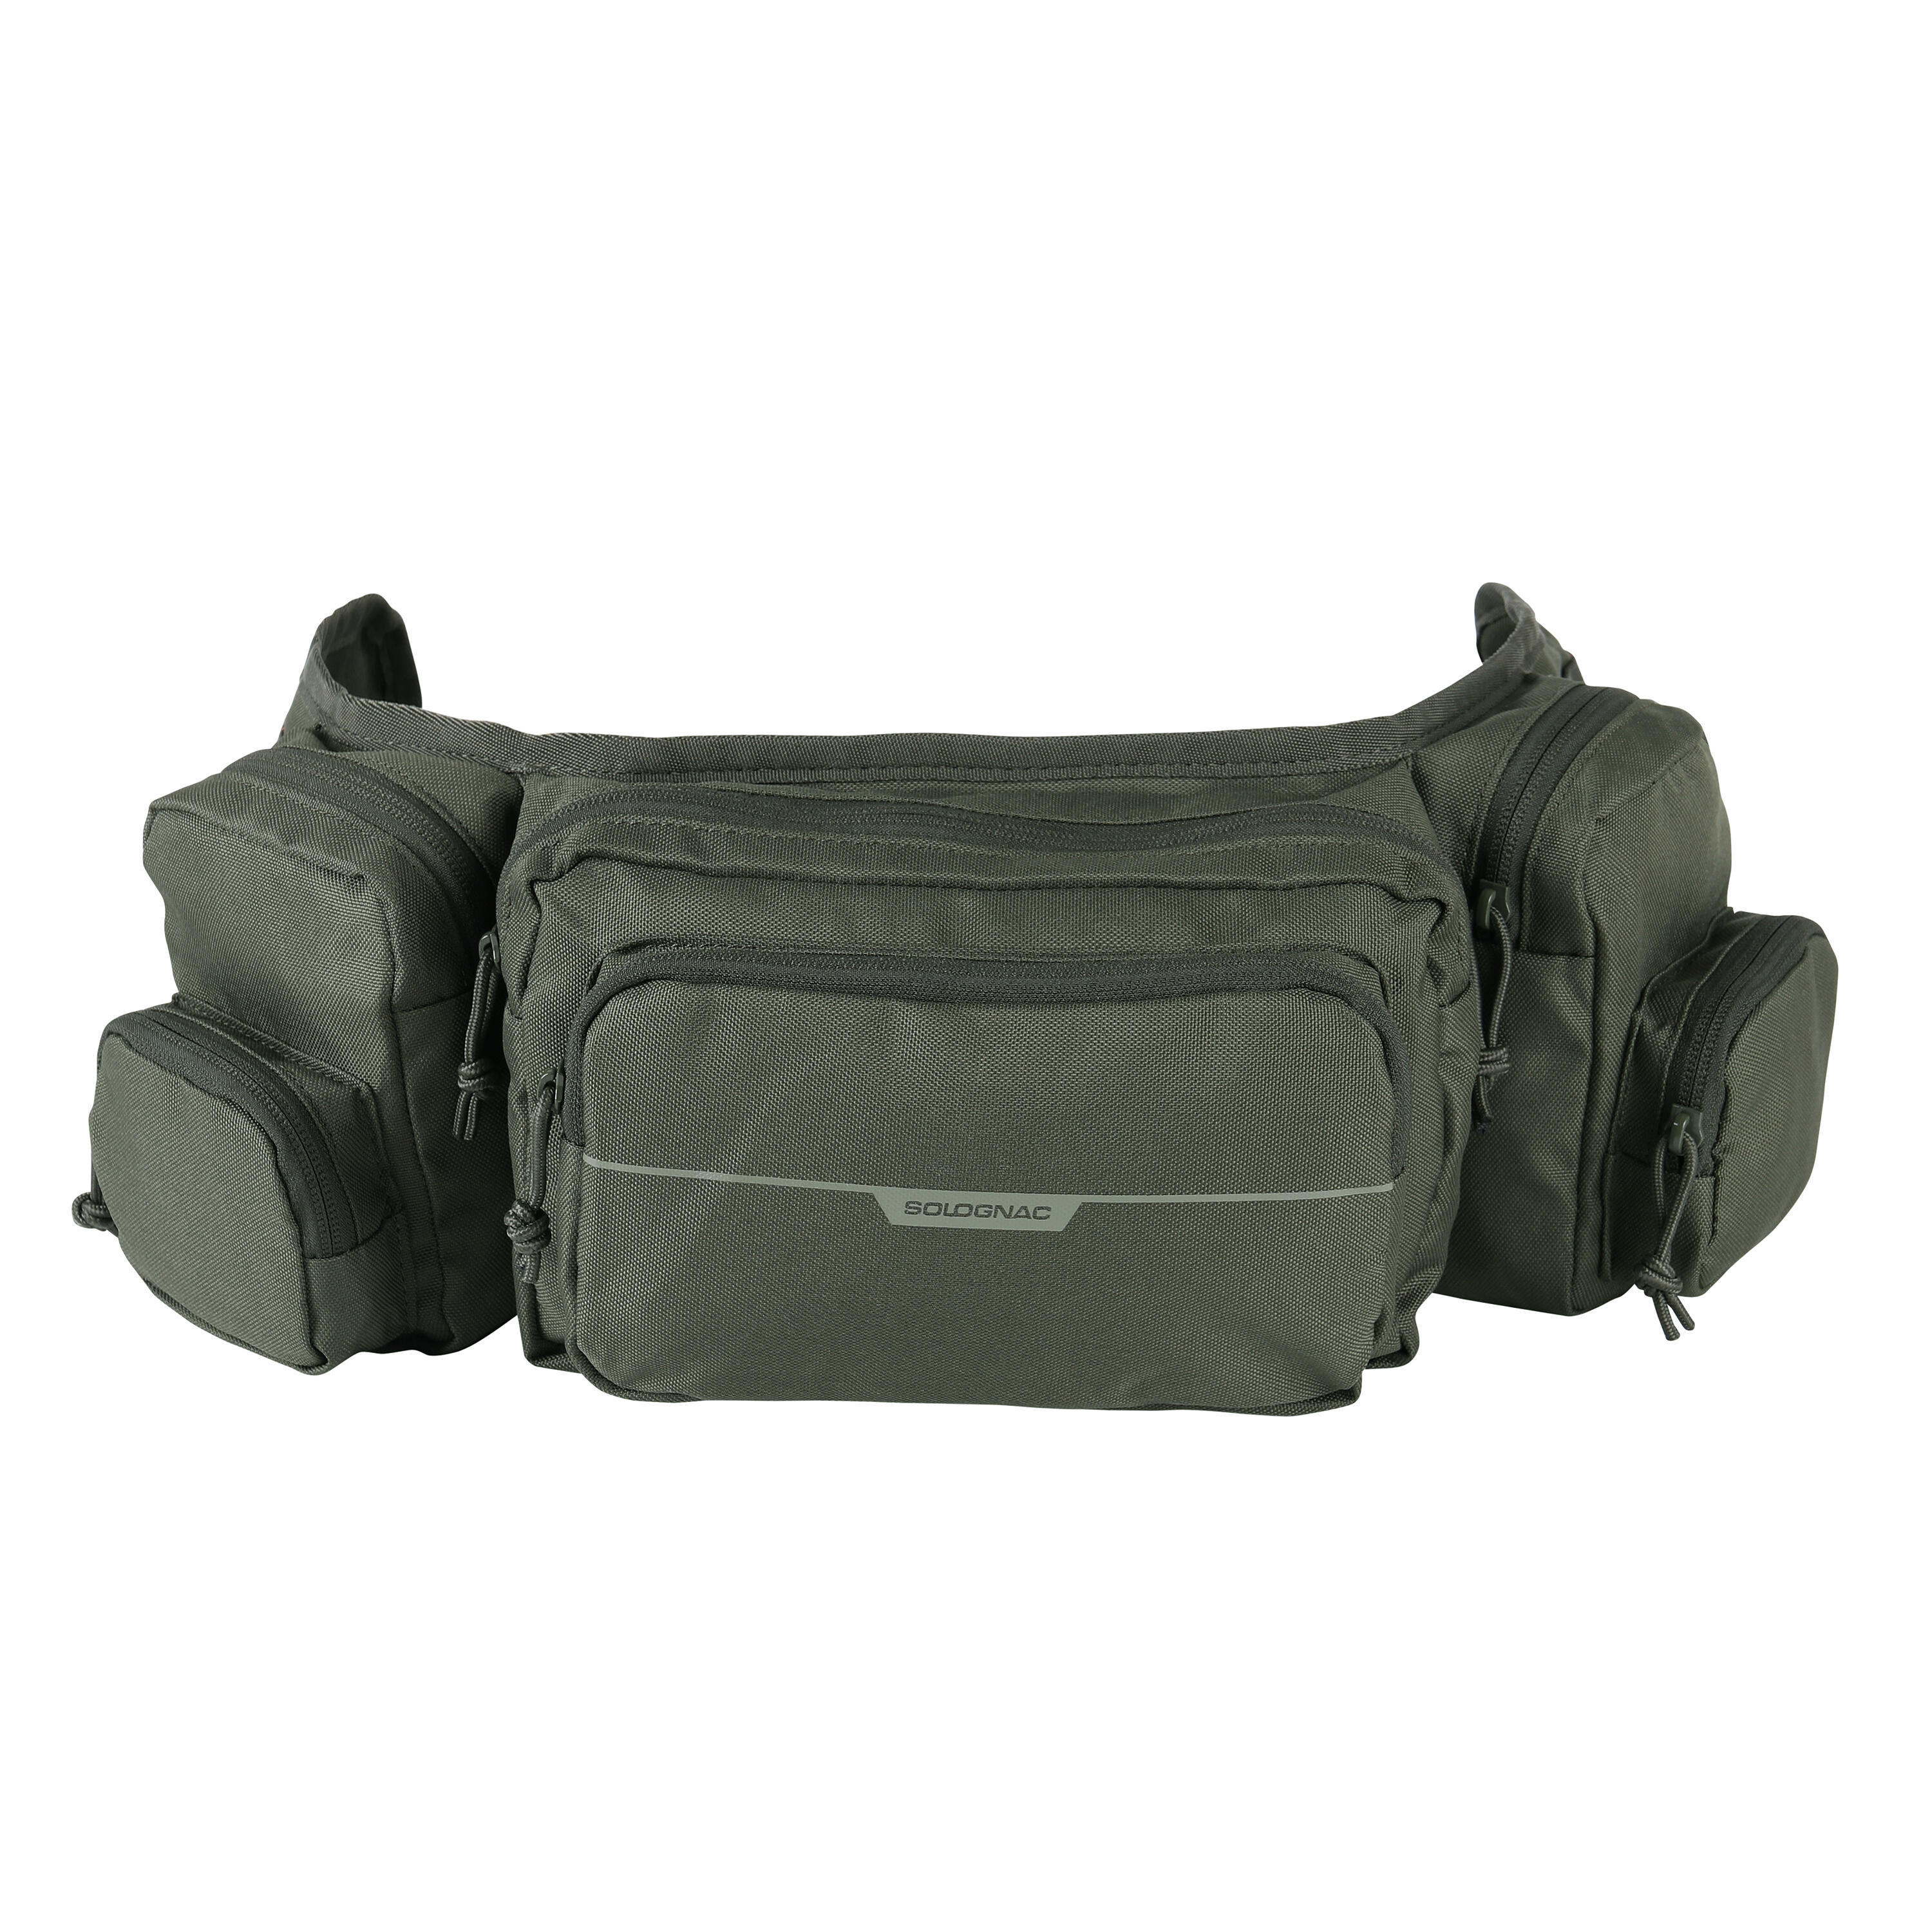 LIKE NEW: Bum Bag Travel - Decathlon - Khaki - 7Litres, Men's Fashion, Bags,  Belt bags, Clutches and Pouches on Carousell